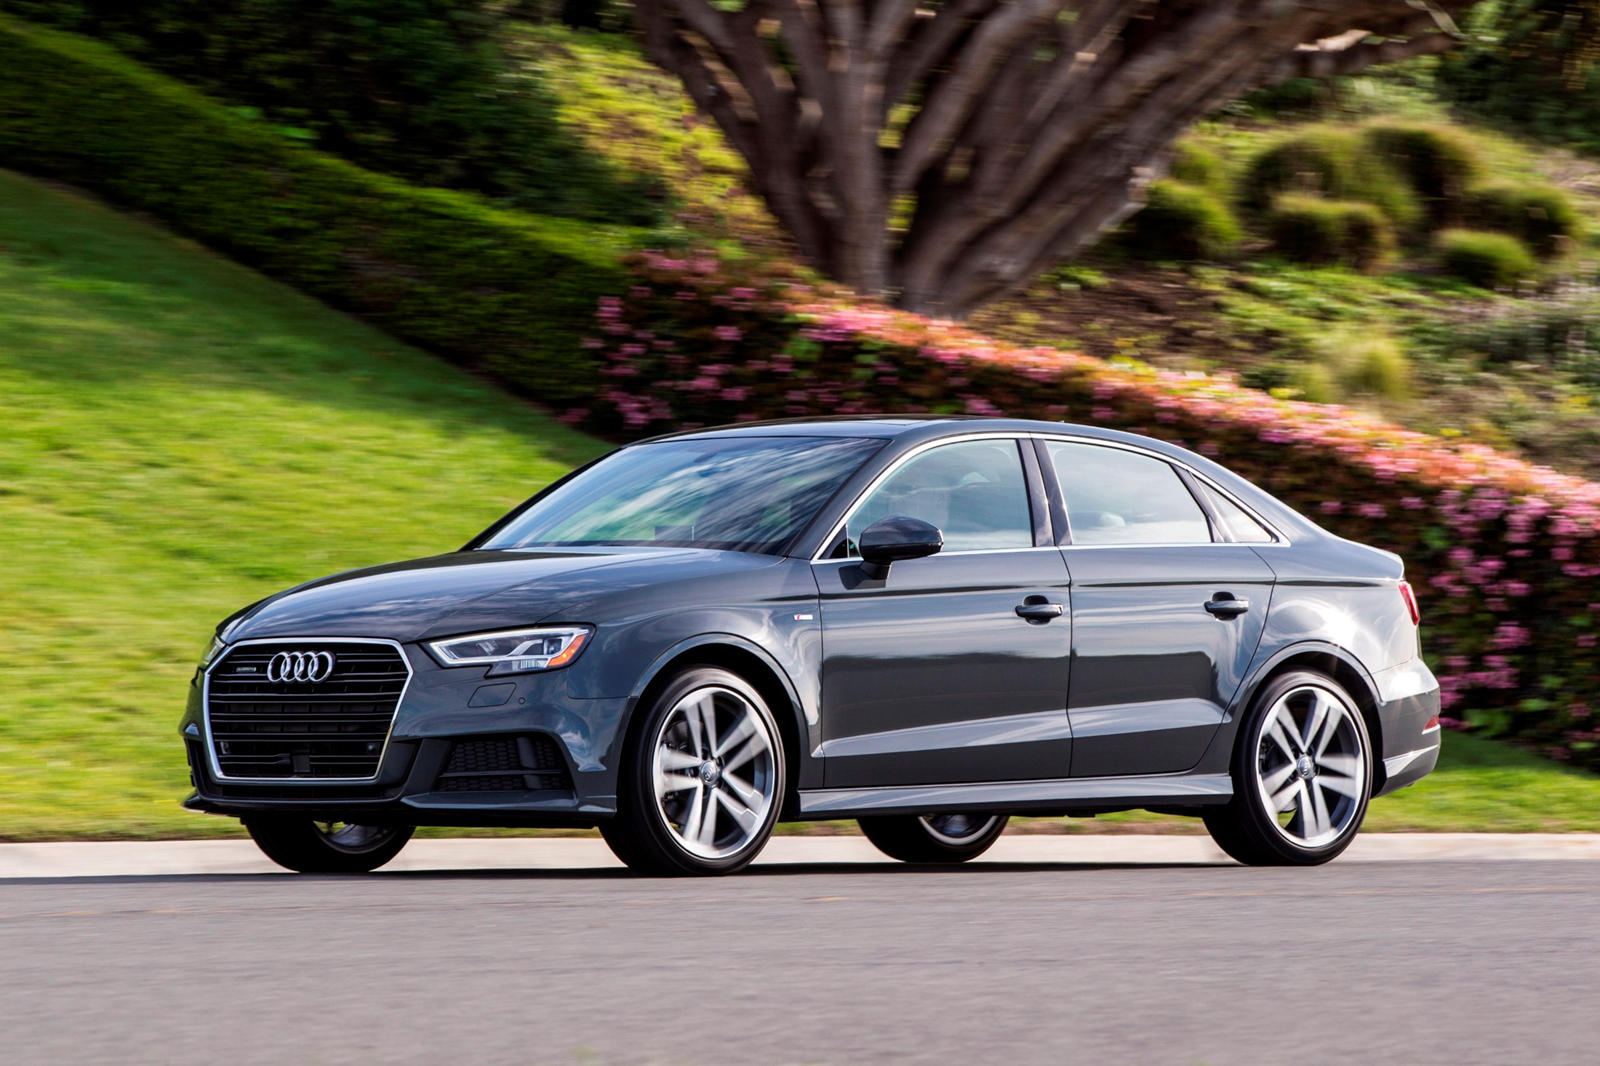 2018 Audi A3 Sedan Review, Trims, Specs and Price - CarBuzz